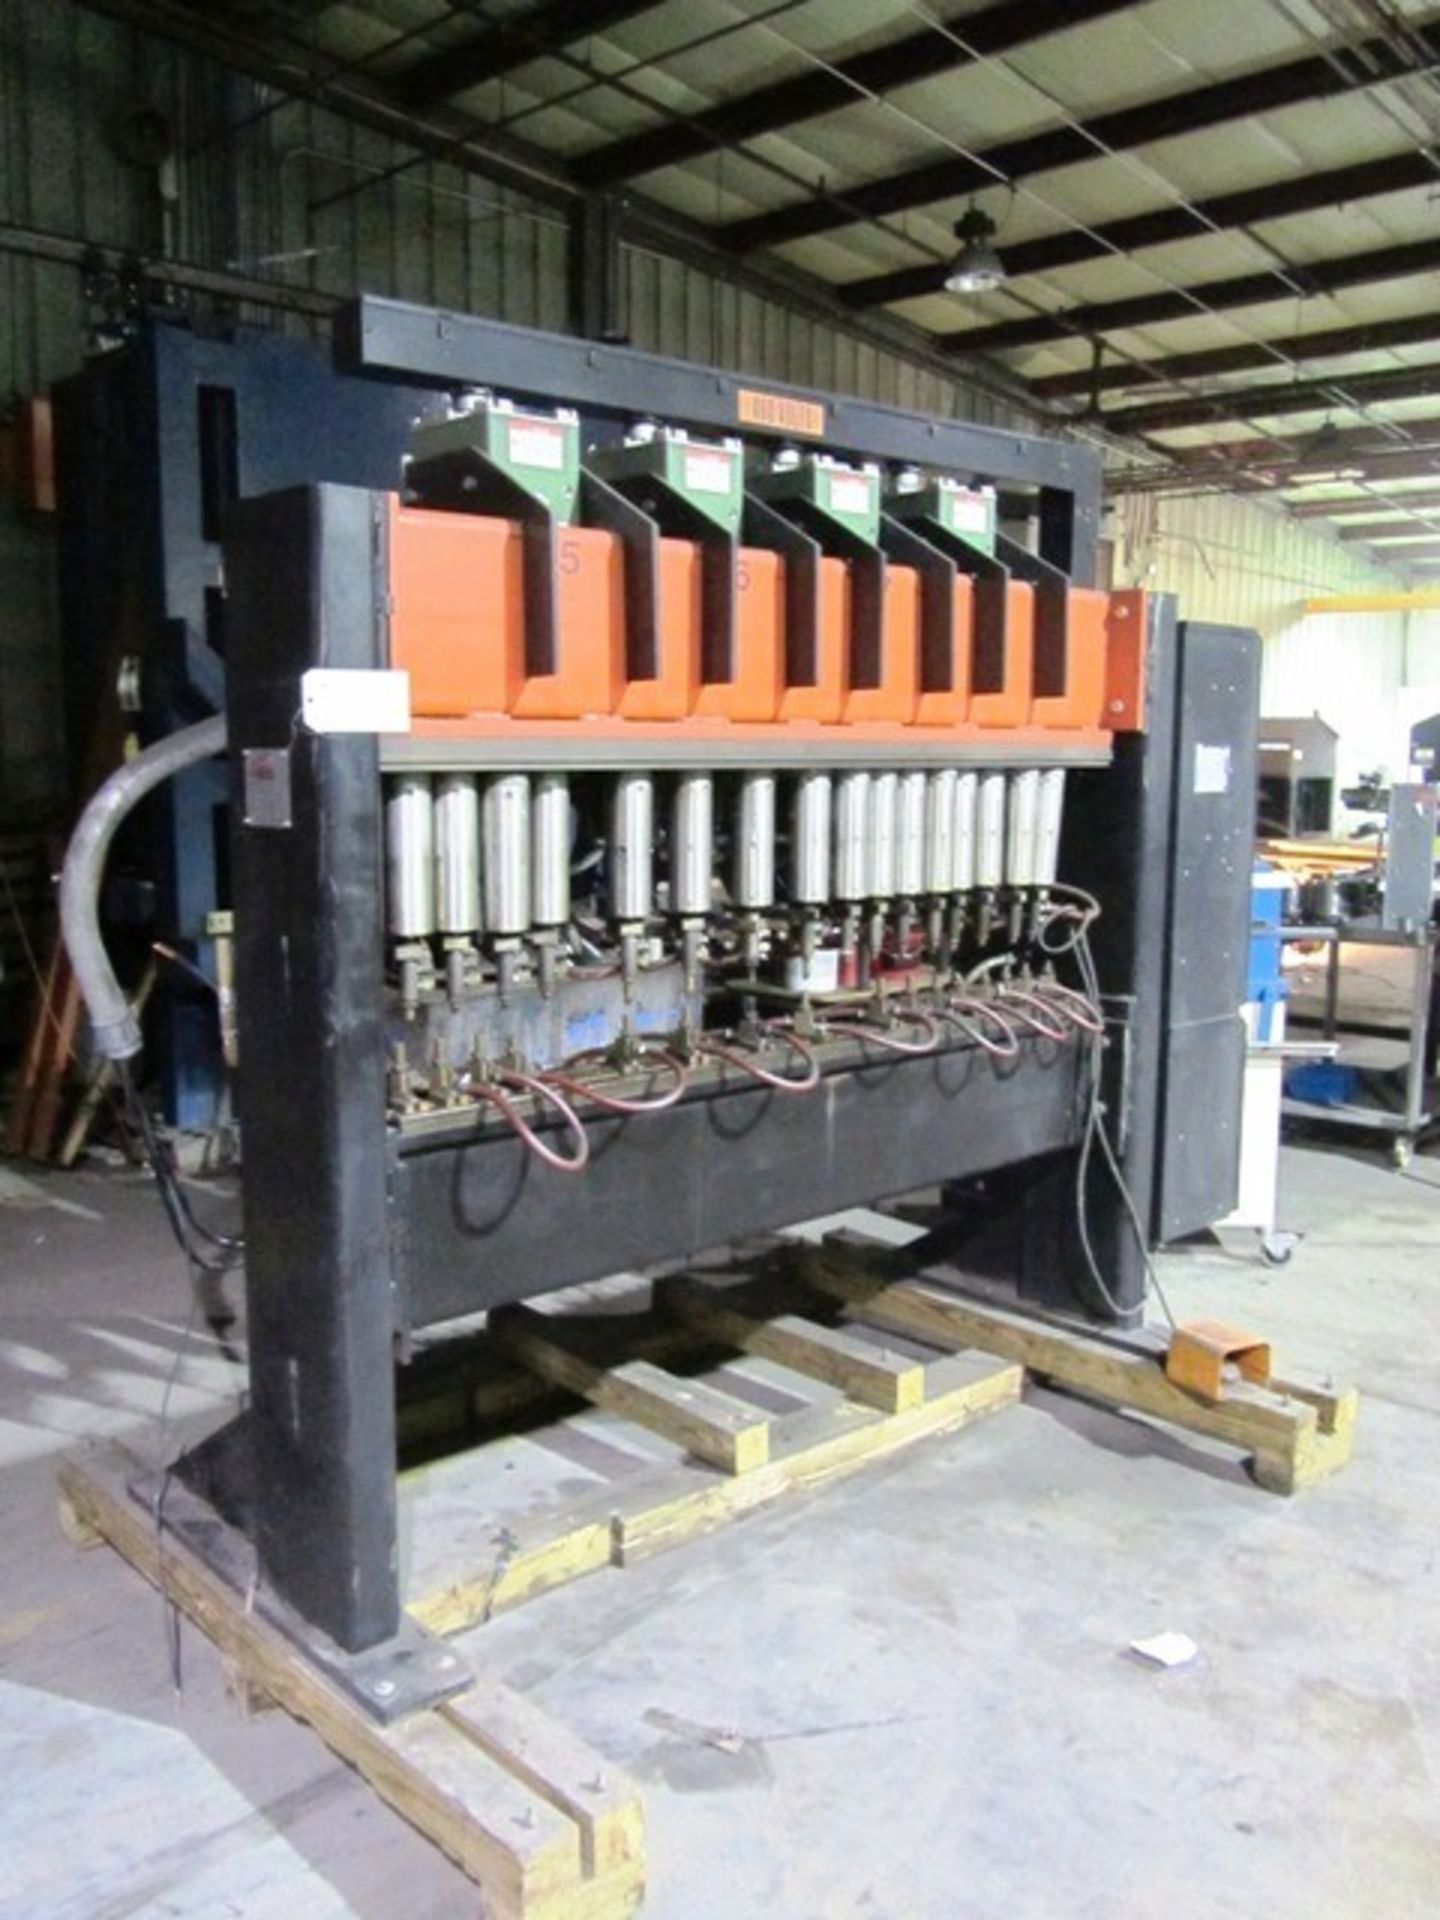 Hoffman Chicago 16 Position Spot Welder with 85KVA, Remote Foot Pedal & Weldtronic WTC WT-900 PLC - Image 2 of 3